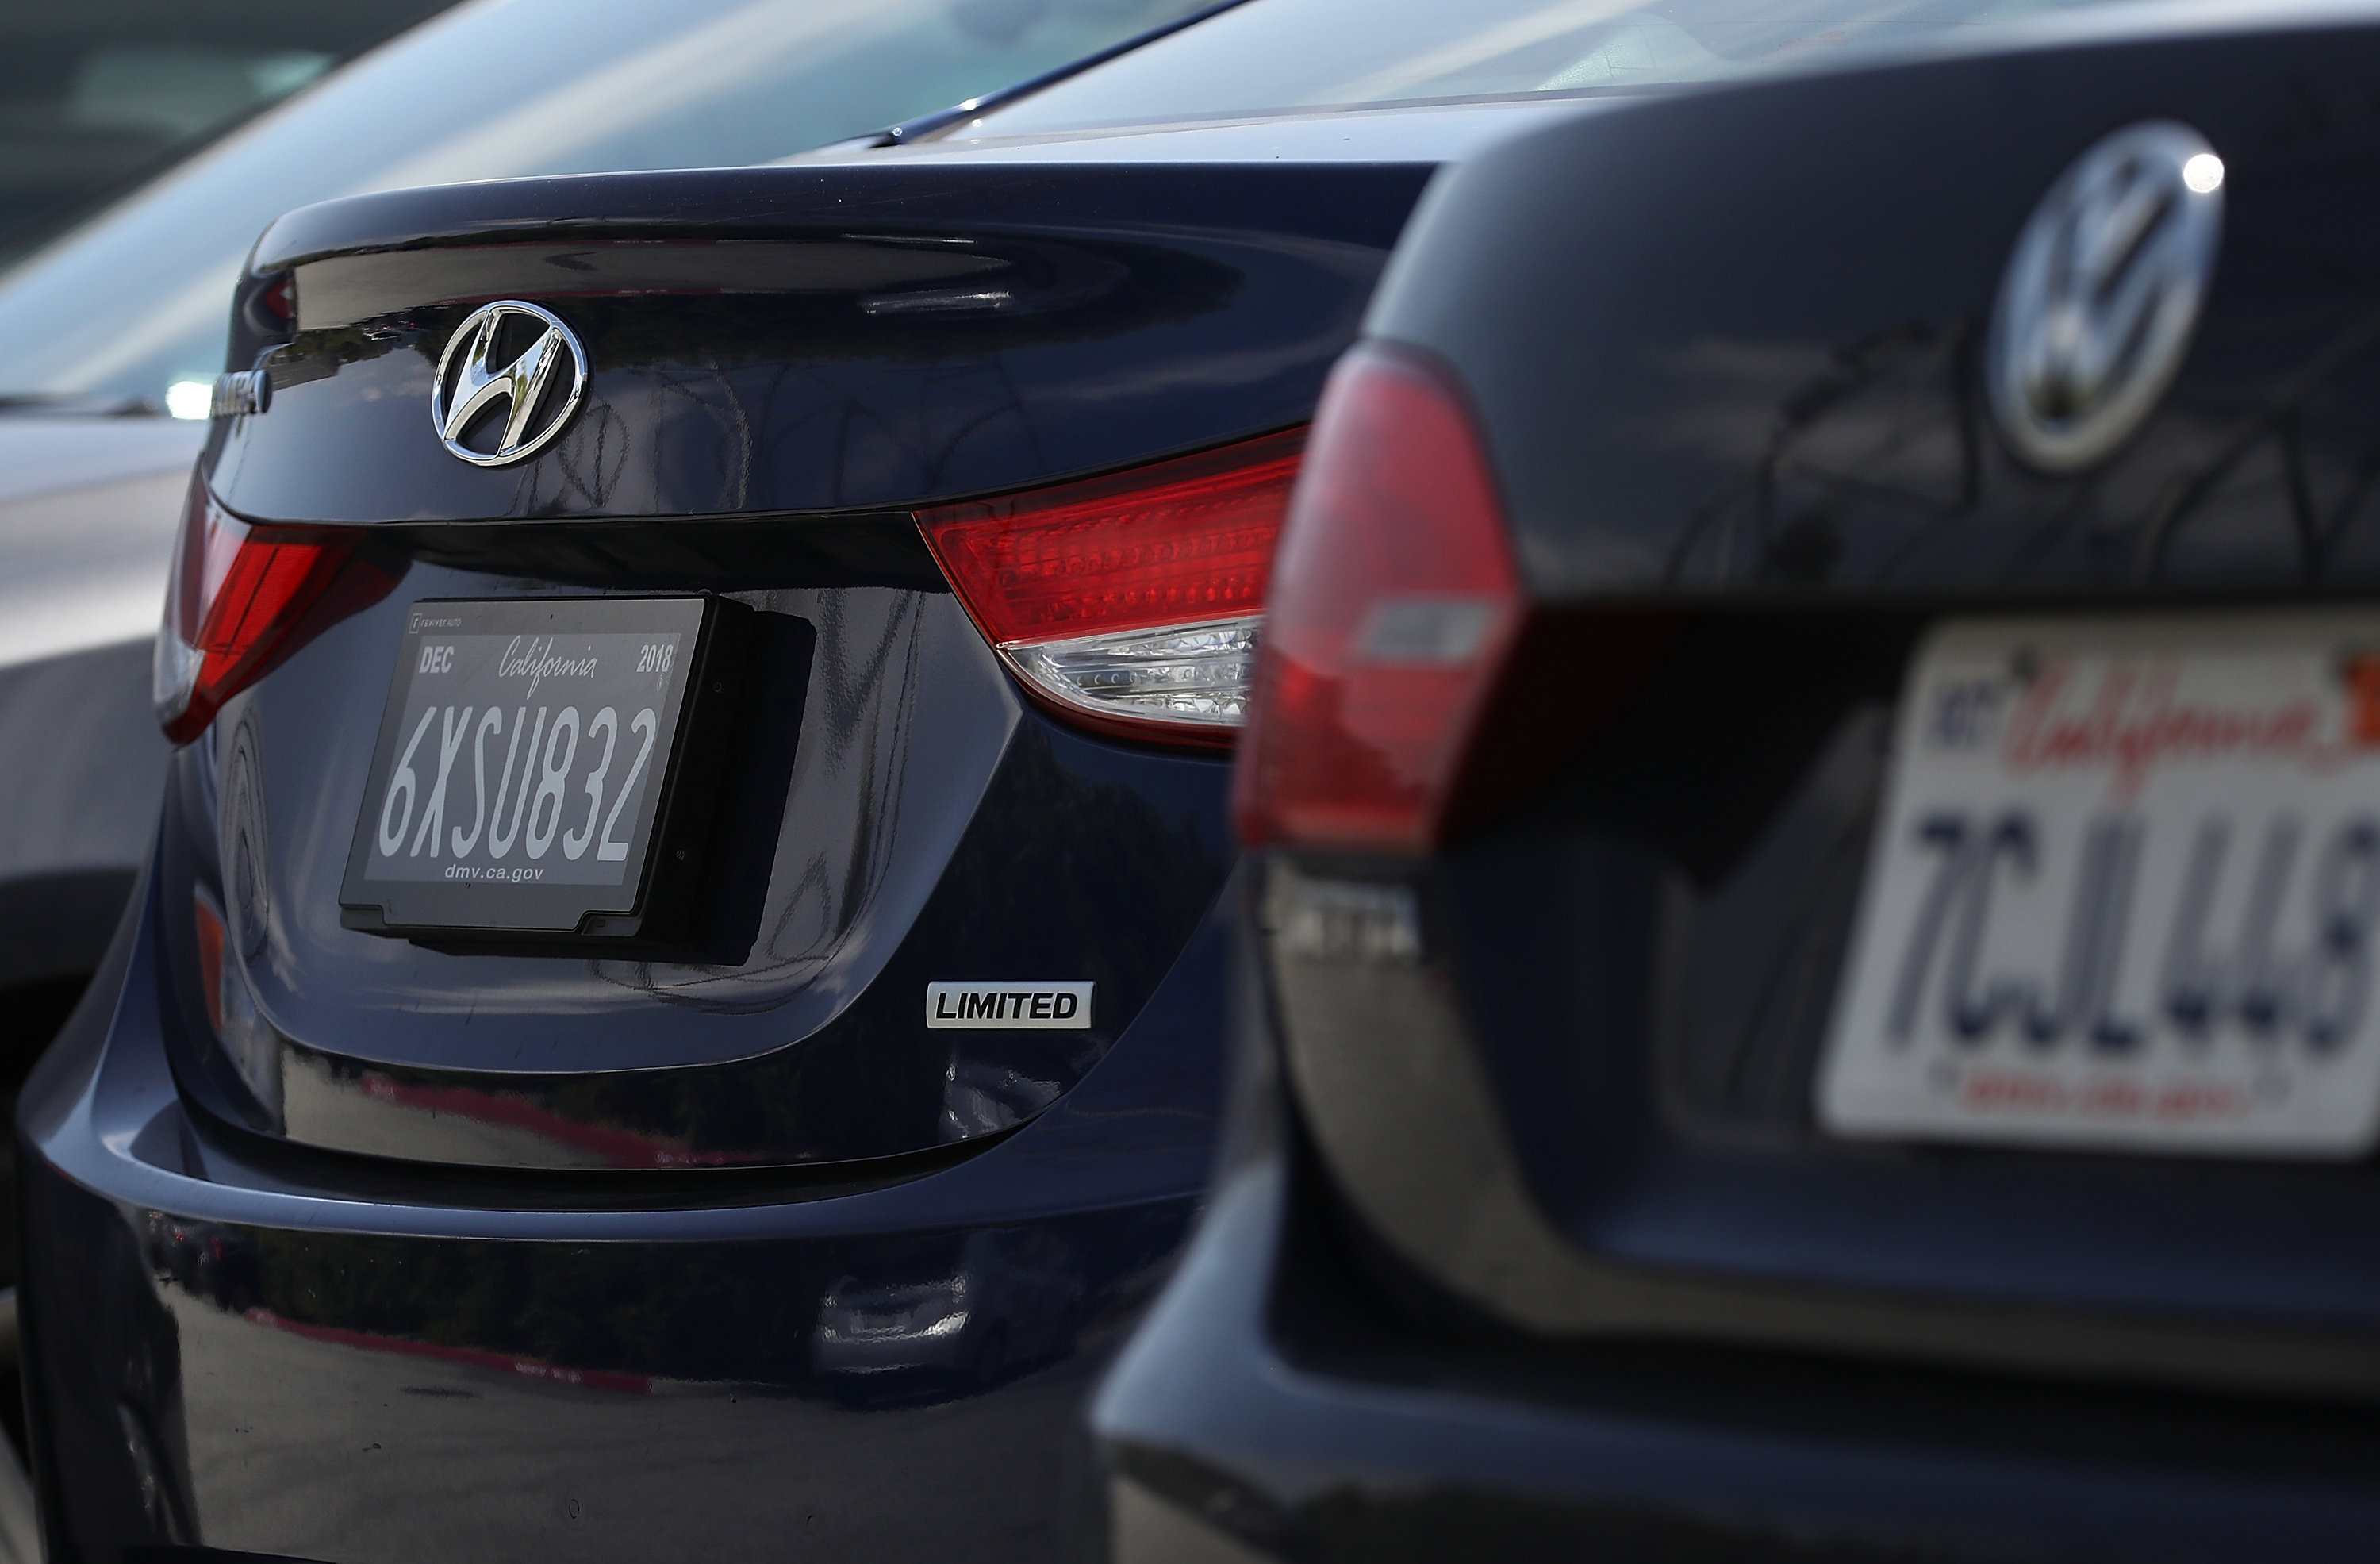 San Francisco takes action against illegal license plate covers.